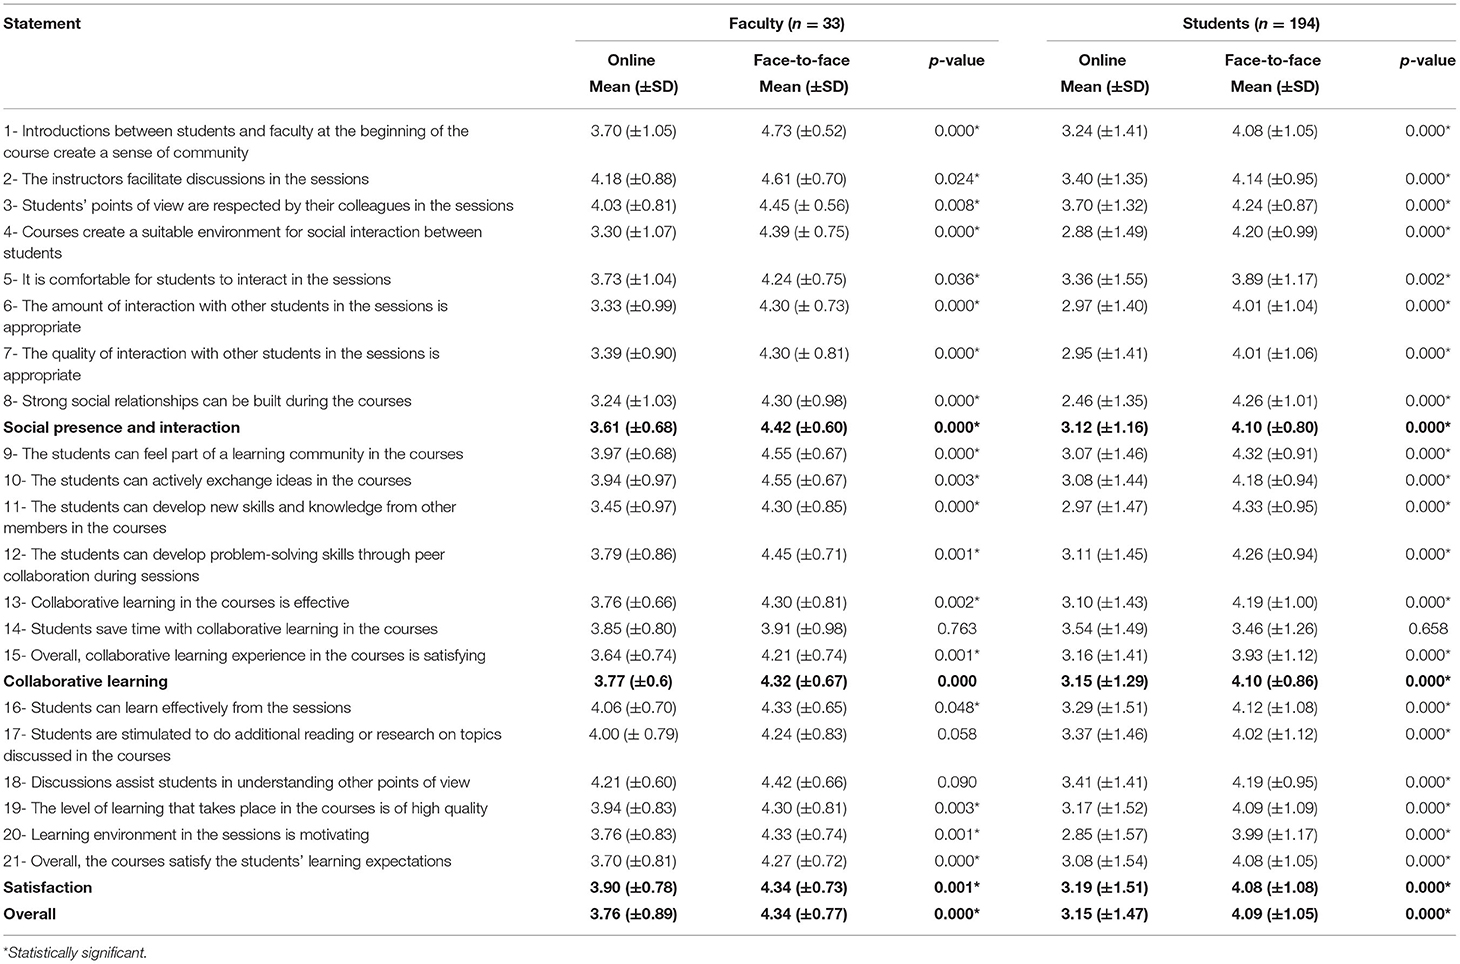 | Online, Face-to-Face, or Blended Learning? Faculty and Medical Students' Perceptions During the COVID-19 A Mixed-Method